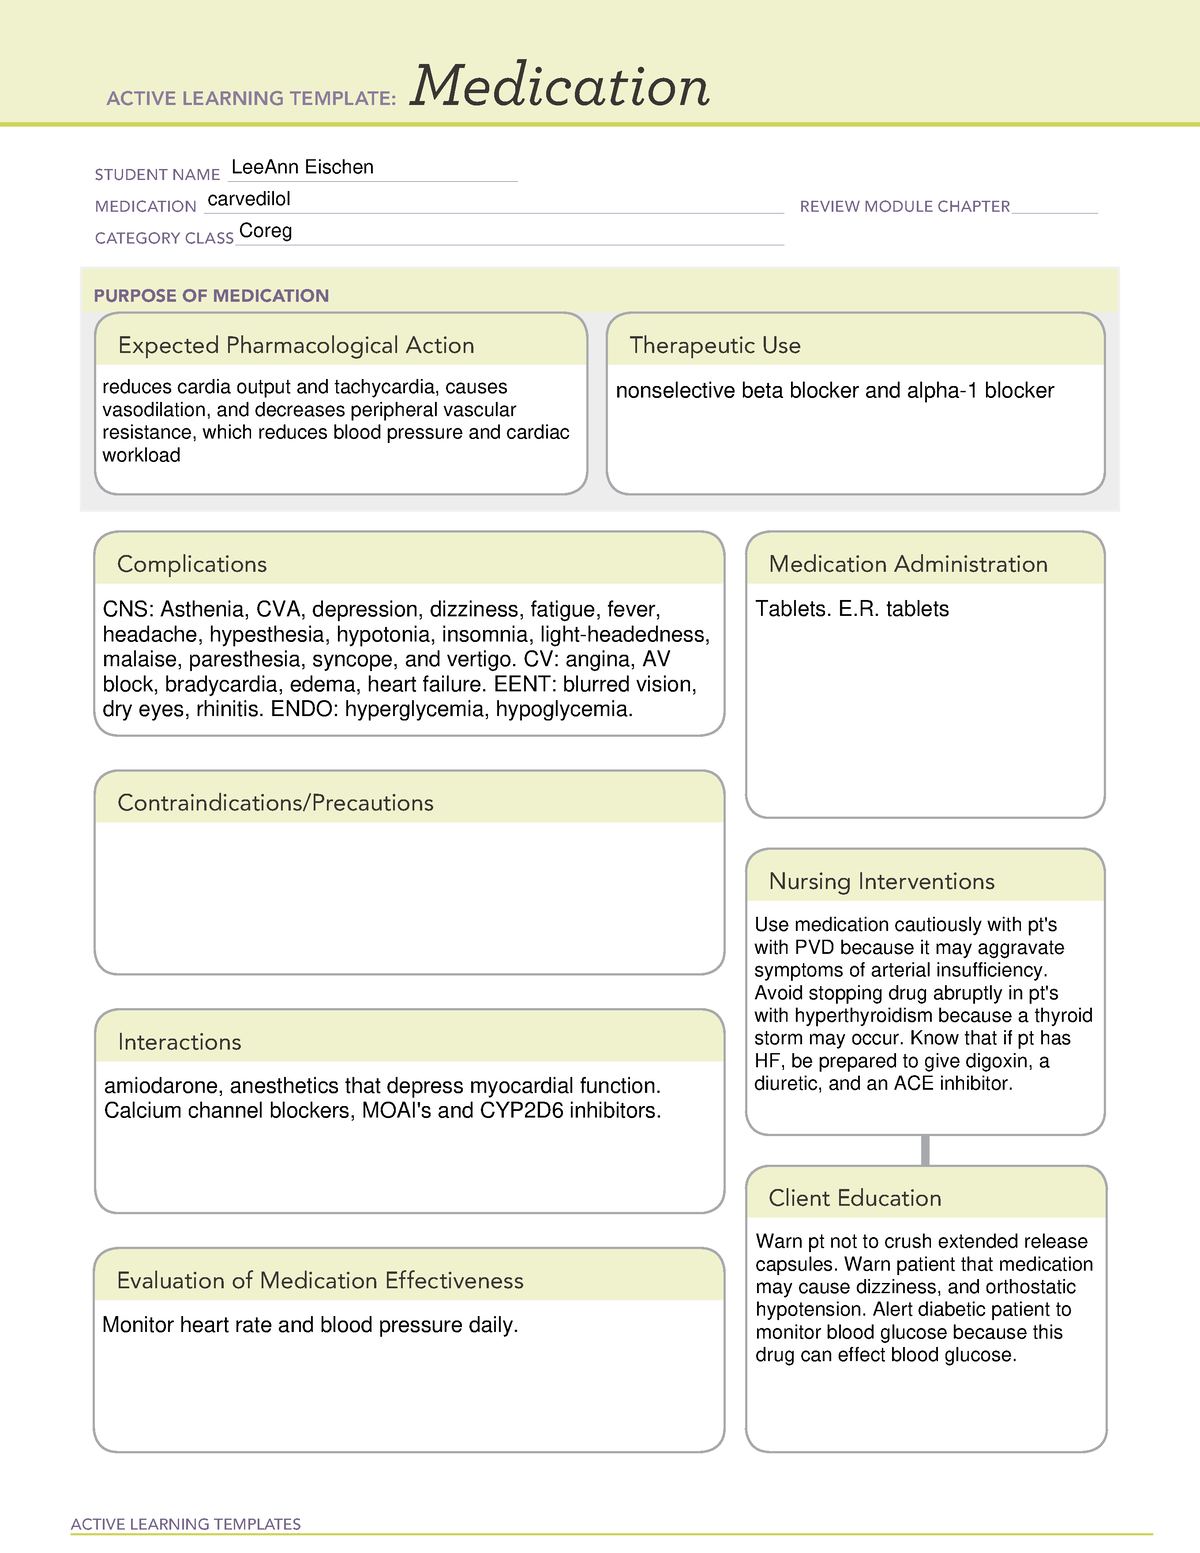 Carvedilol Medication Sheet Template ATI ACTIVE LEARNING TEMPLATES